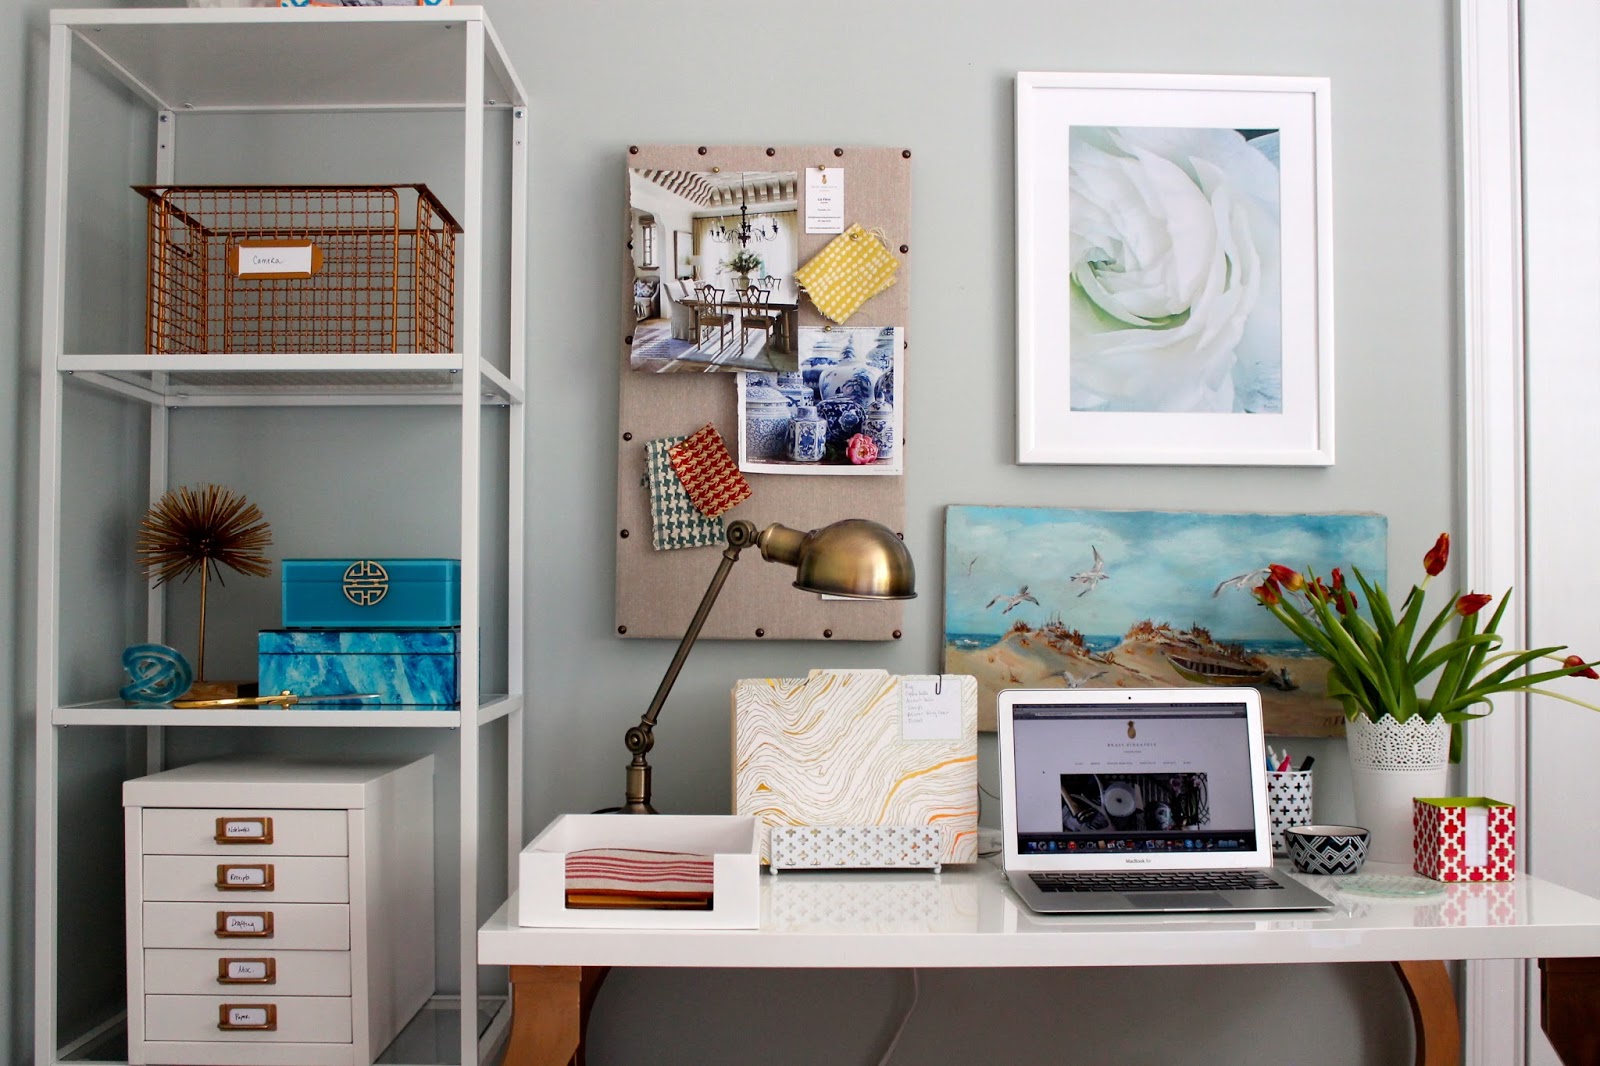 Designing Domesticity: Workspace Reveal